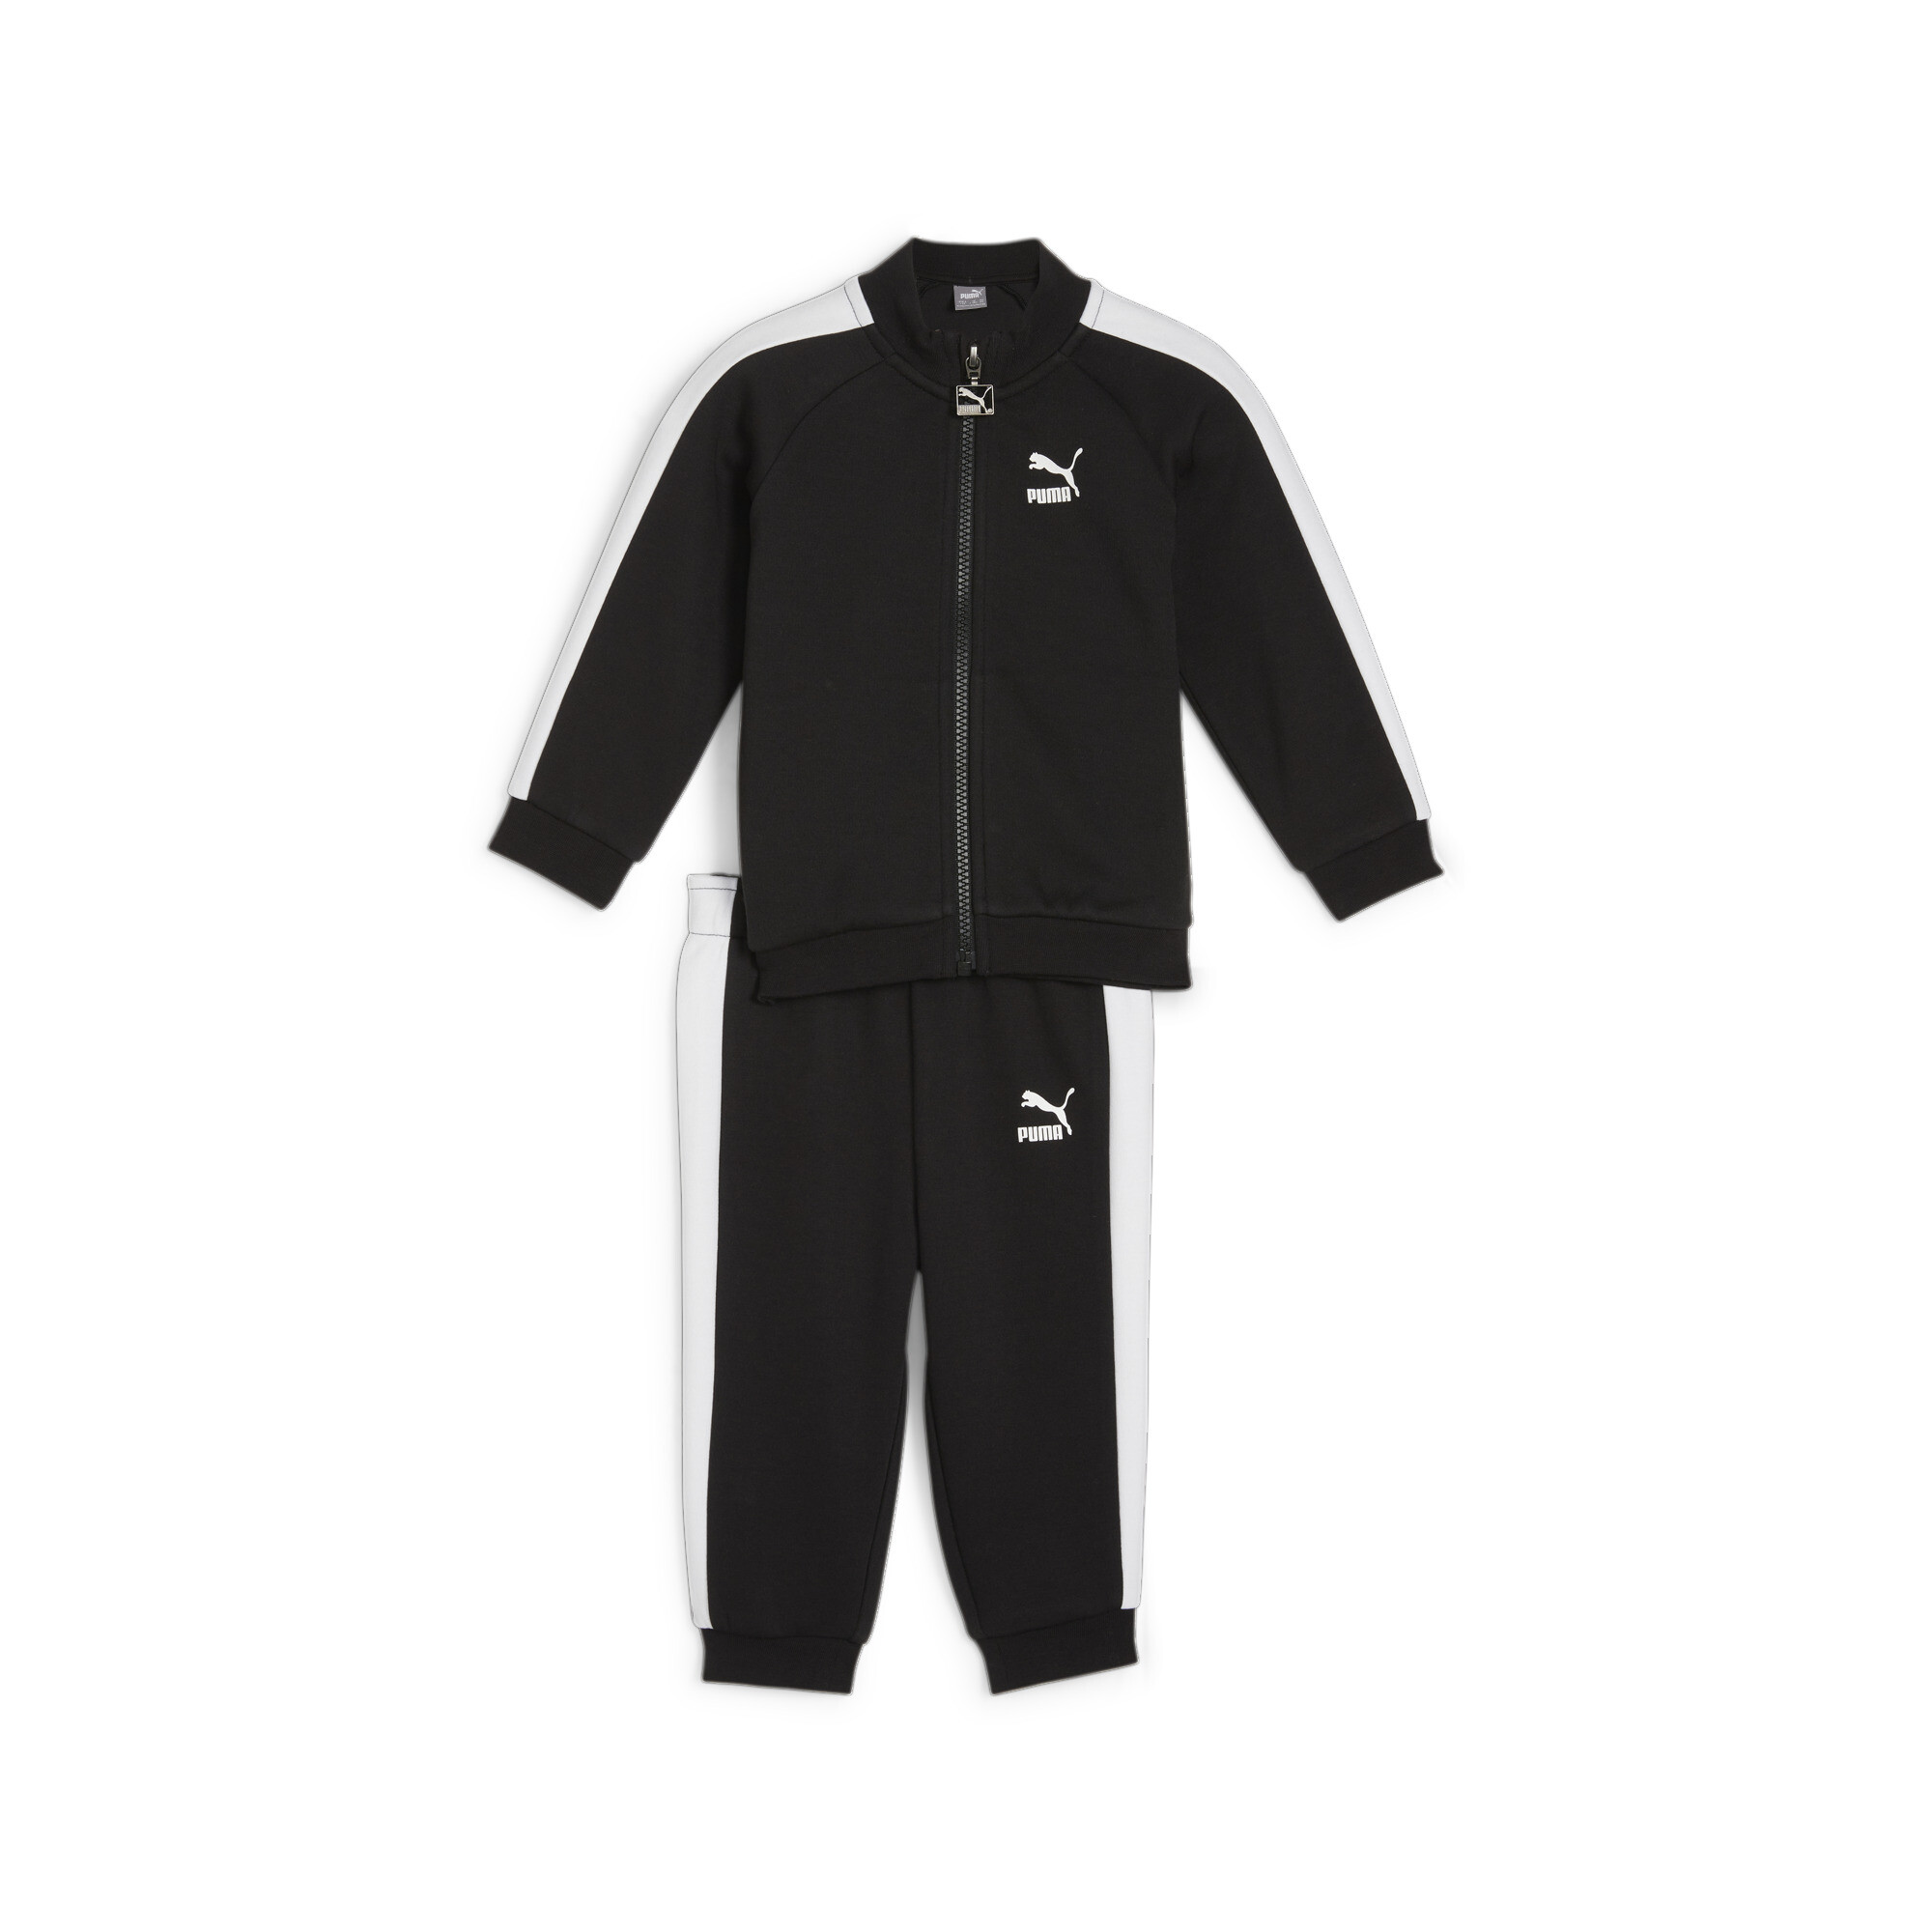 Kids' PUMA MINICATS T7 ICONIC Baby Tracksuit Set In 10 - Black, Size 4-6 Months